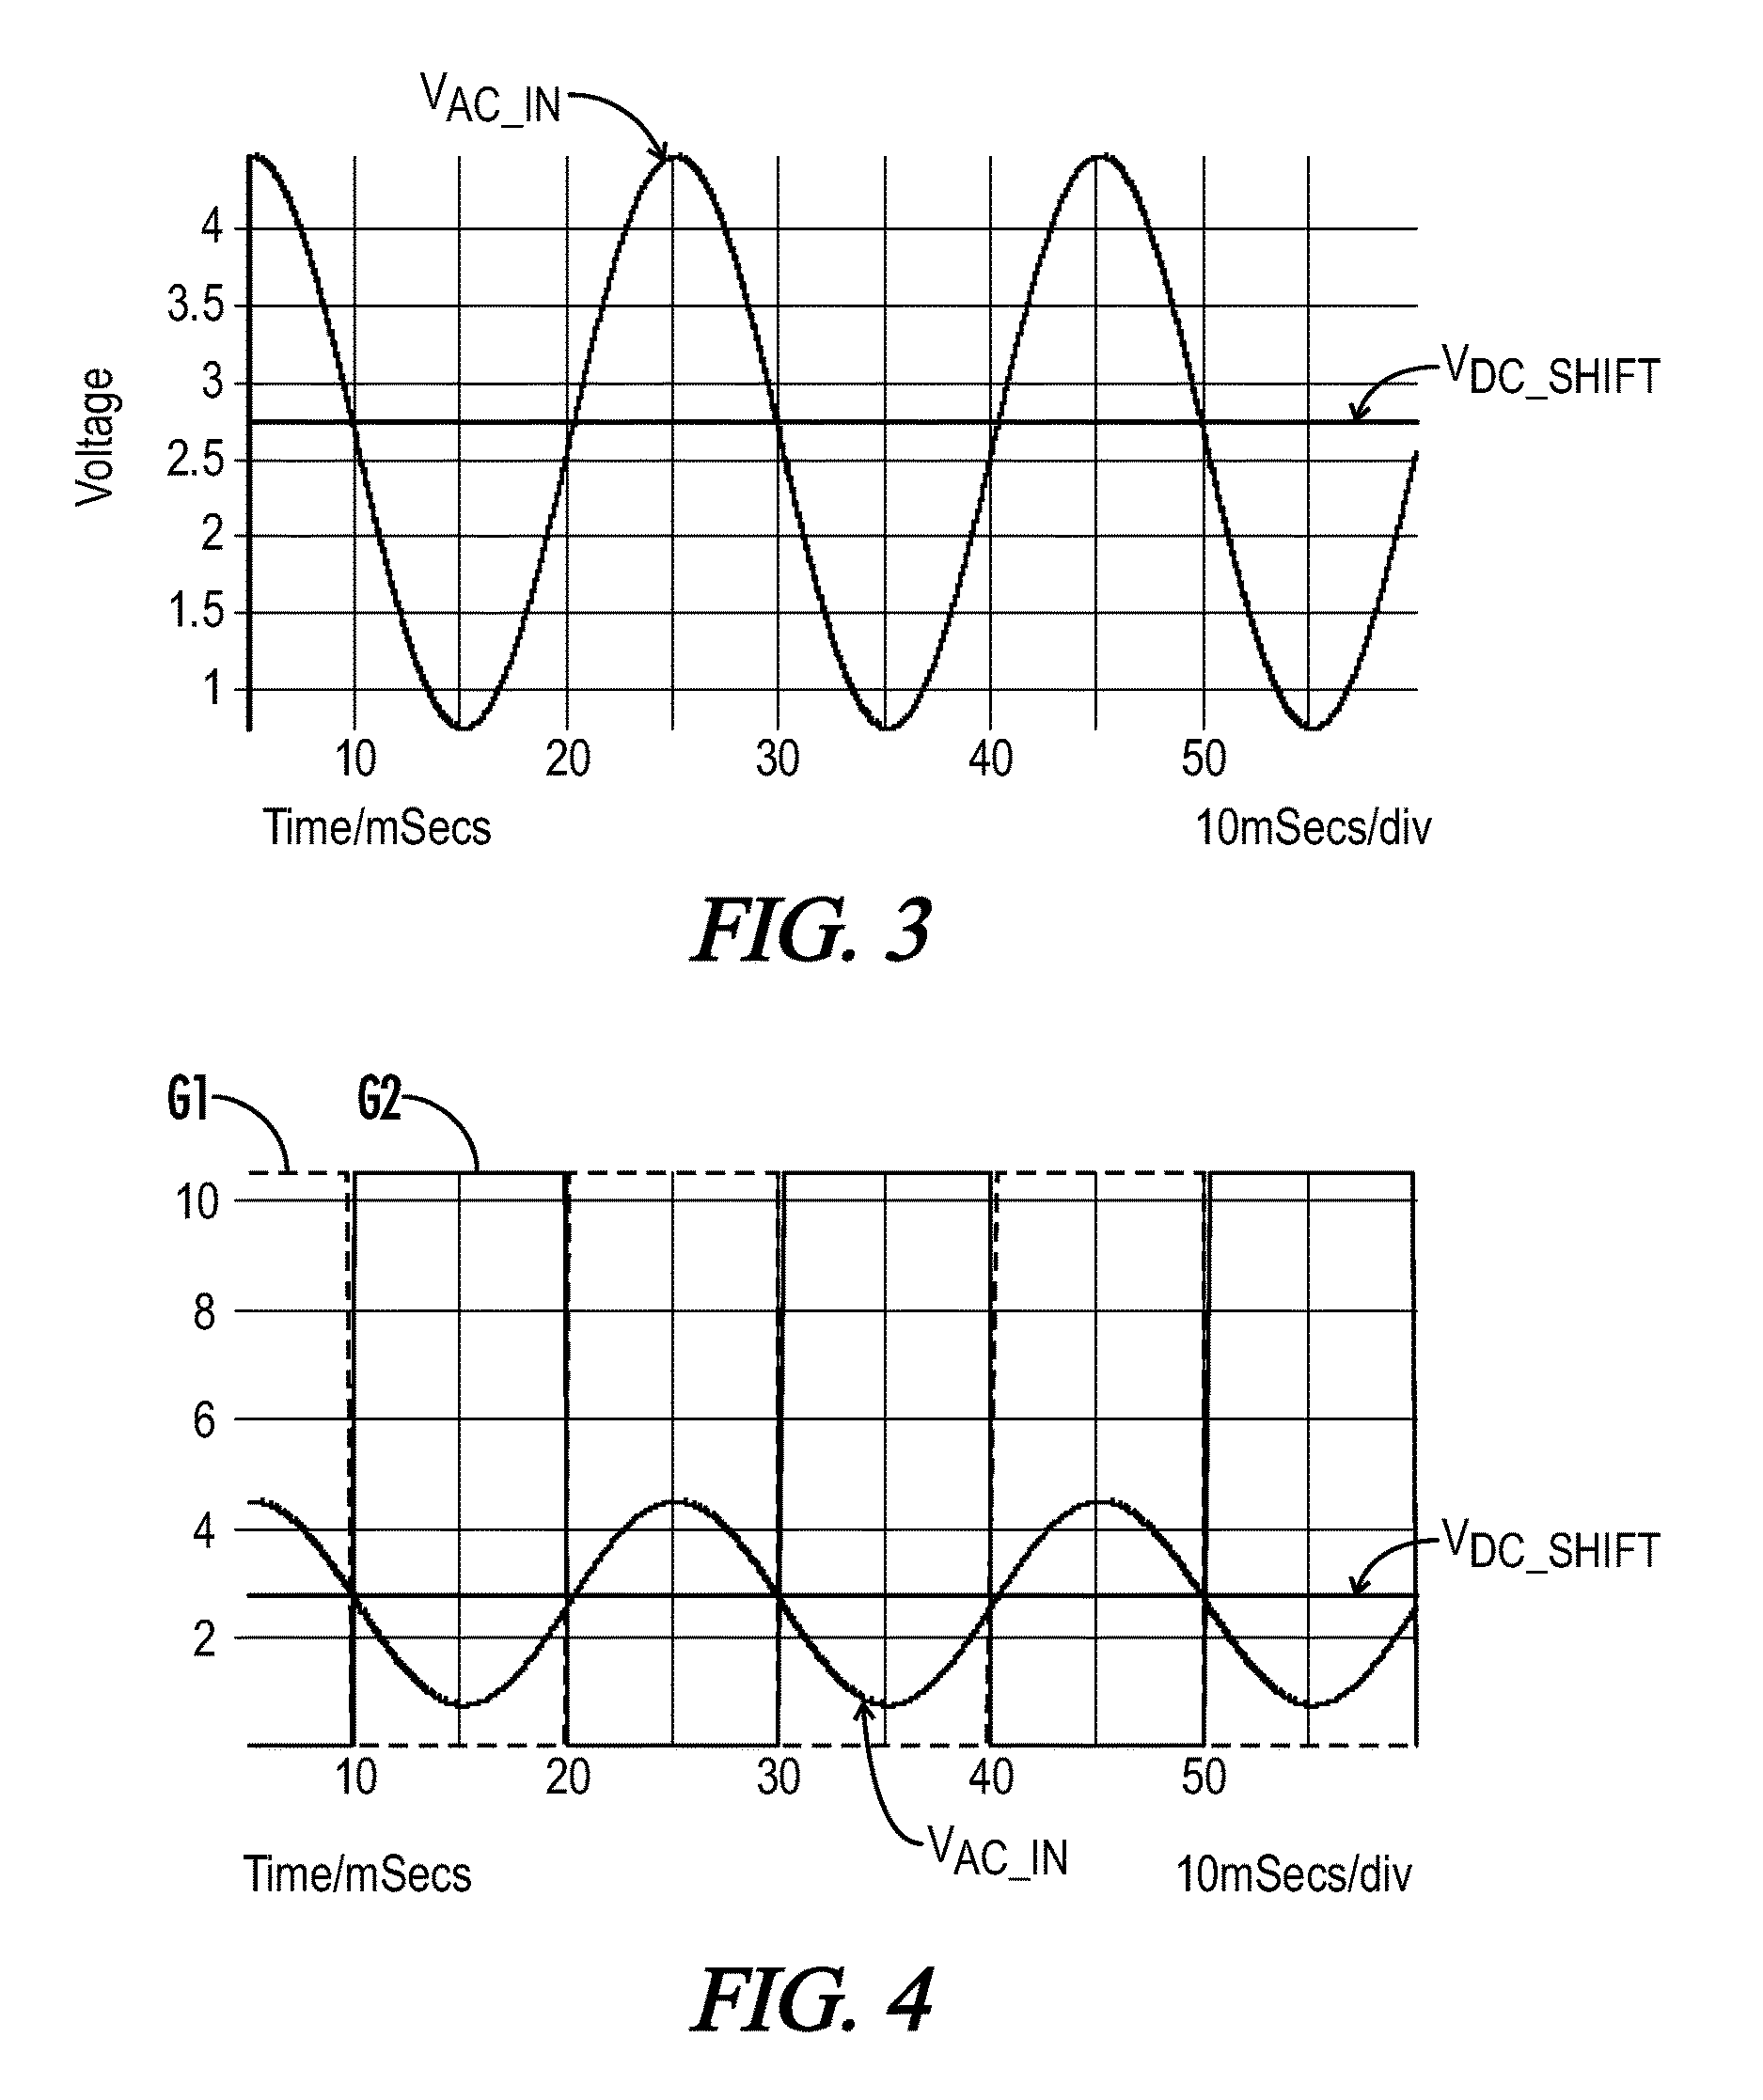 Power converter with self-driven synchronous rectifier control circuitry